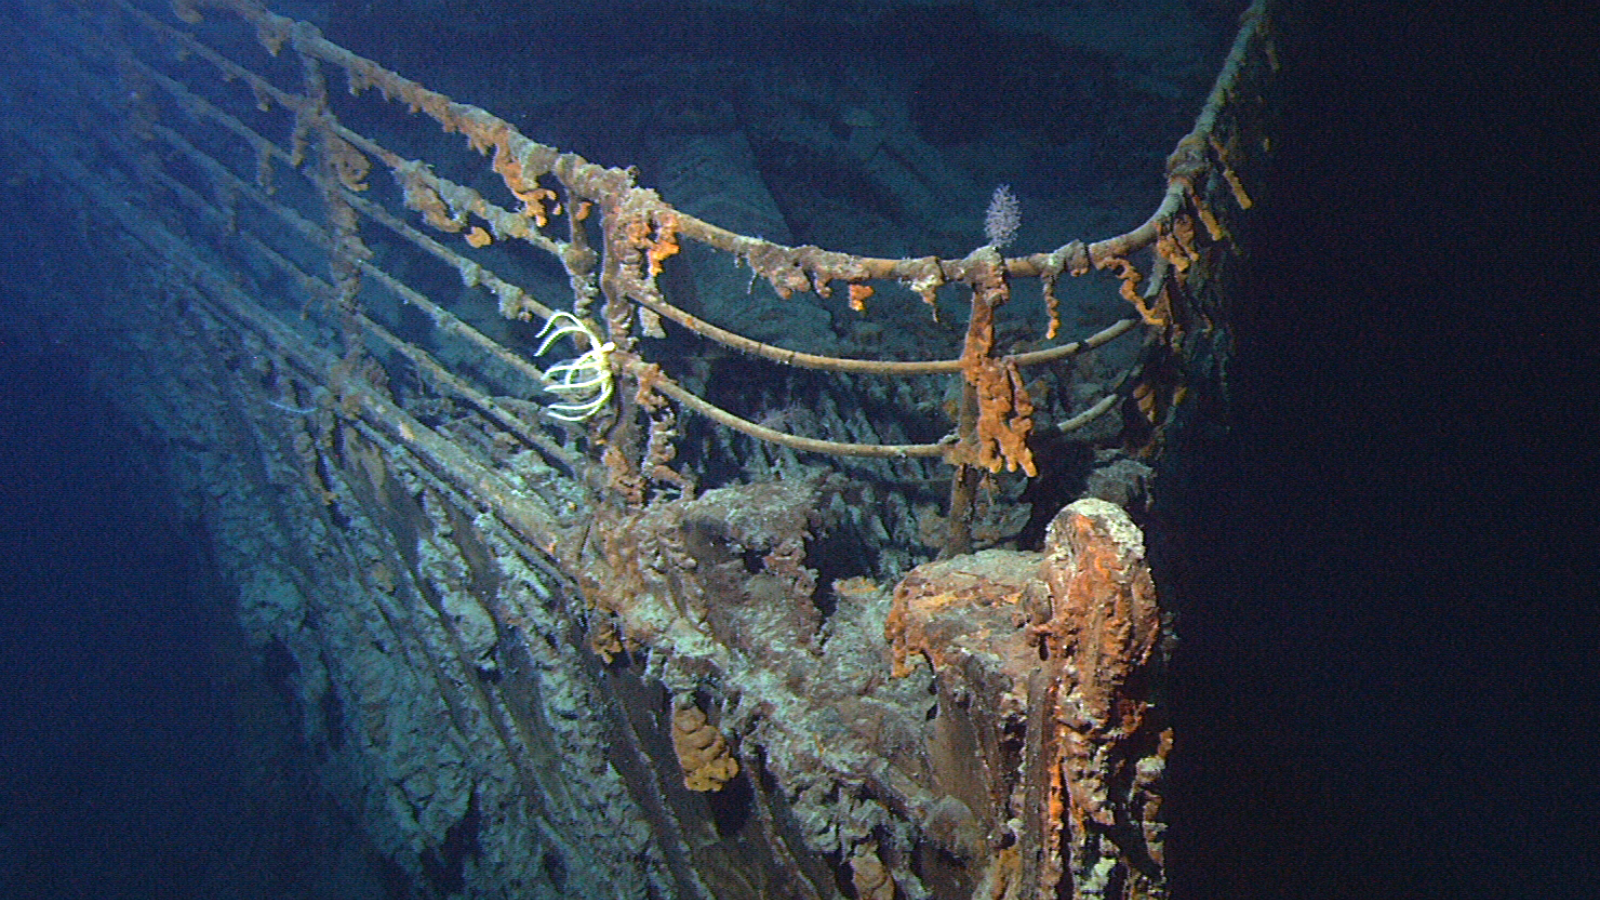 The bow of Titanic, photographed in June 2004